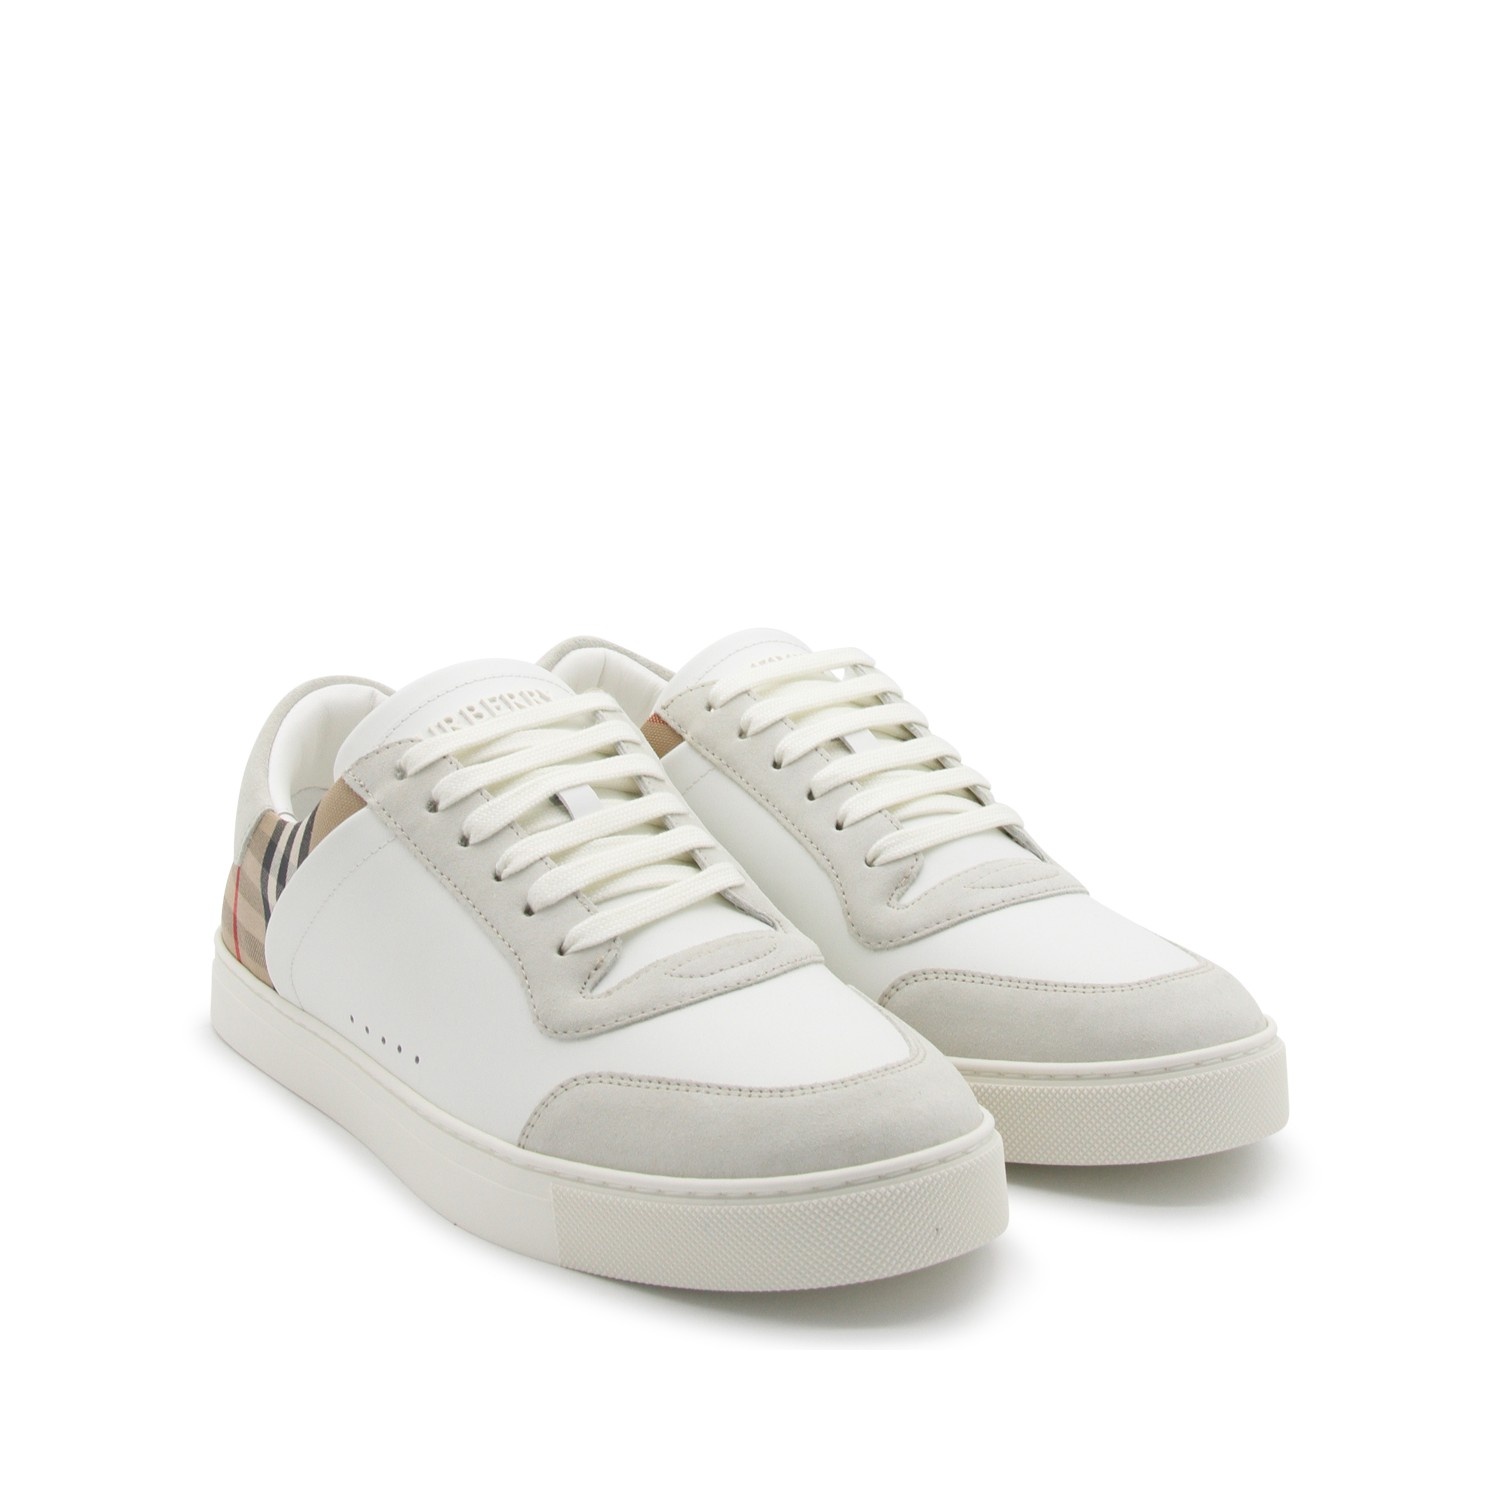 WHITE LEATHER SNEAKERS - 2